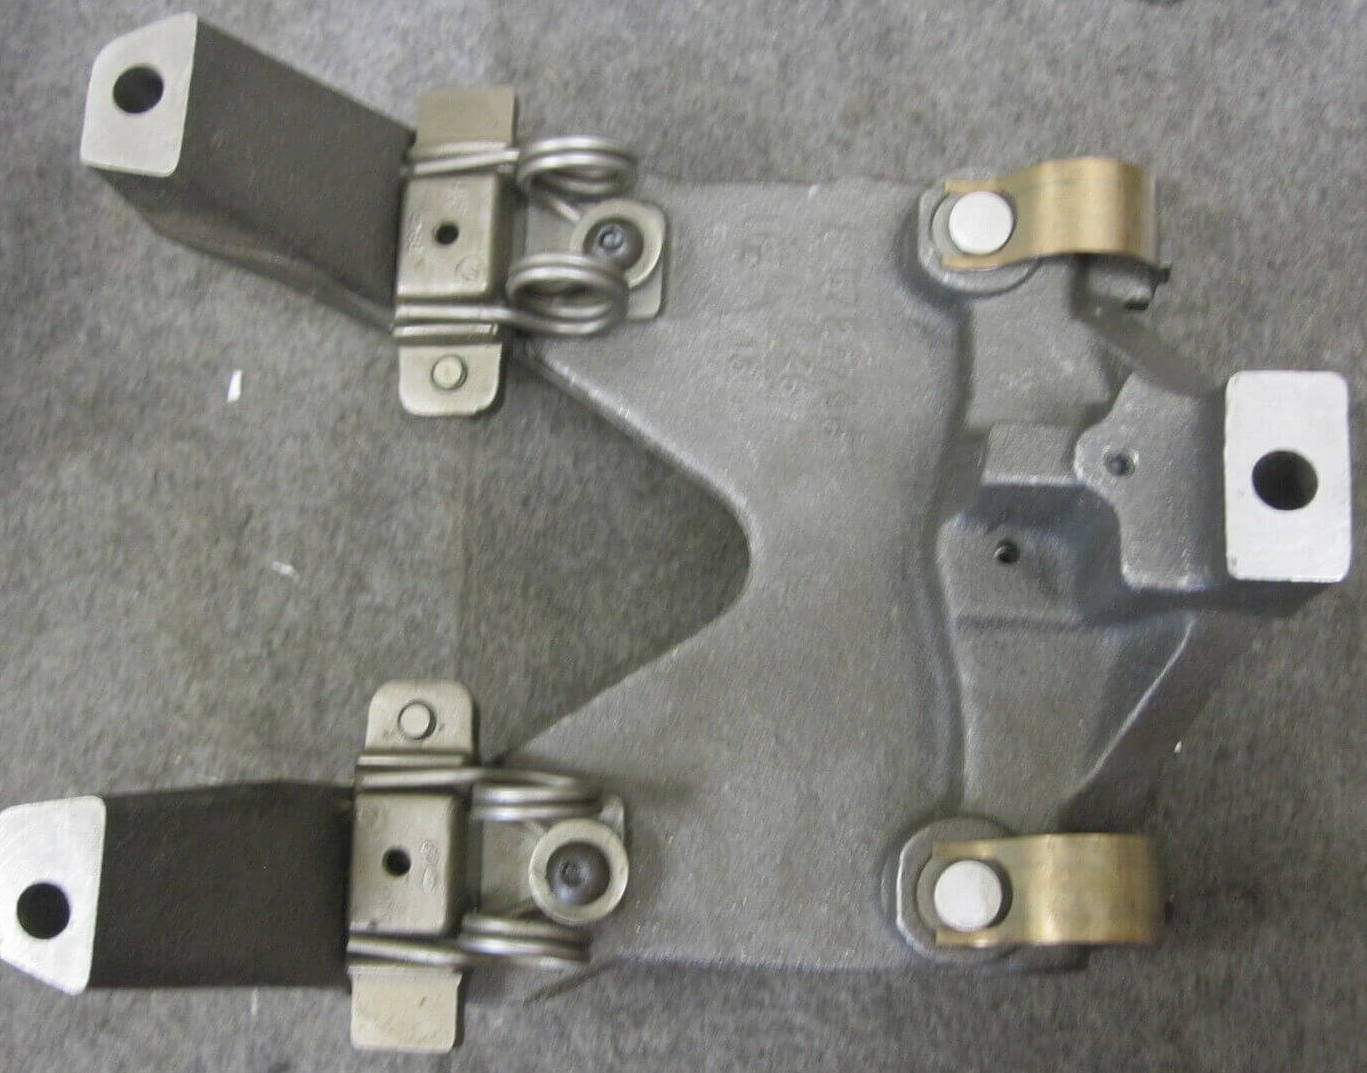 Jae Brake System. What Are Some Examples of Jake Braking Accidents and Risks of Jake Brakes?